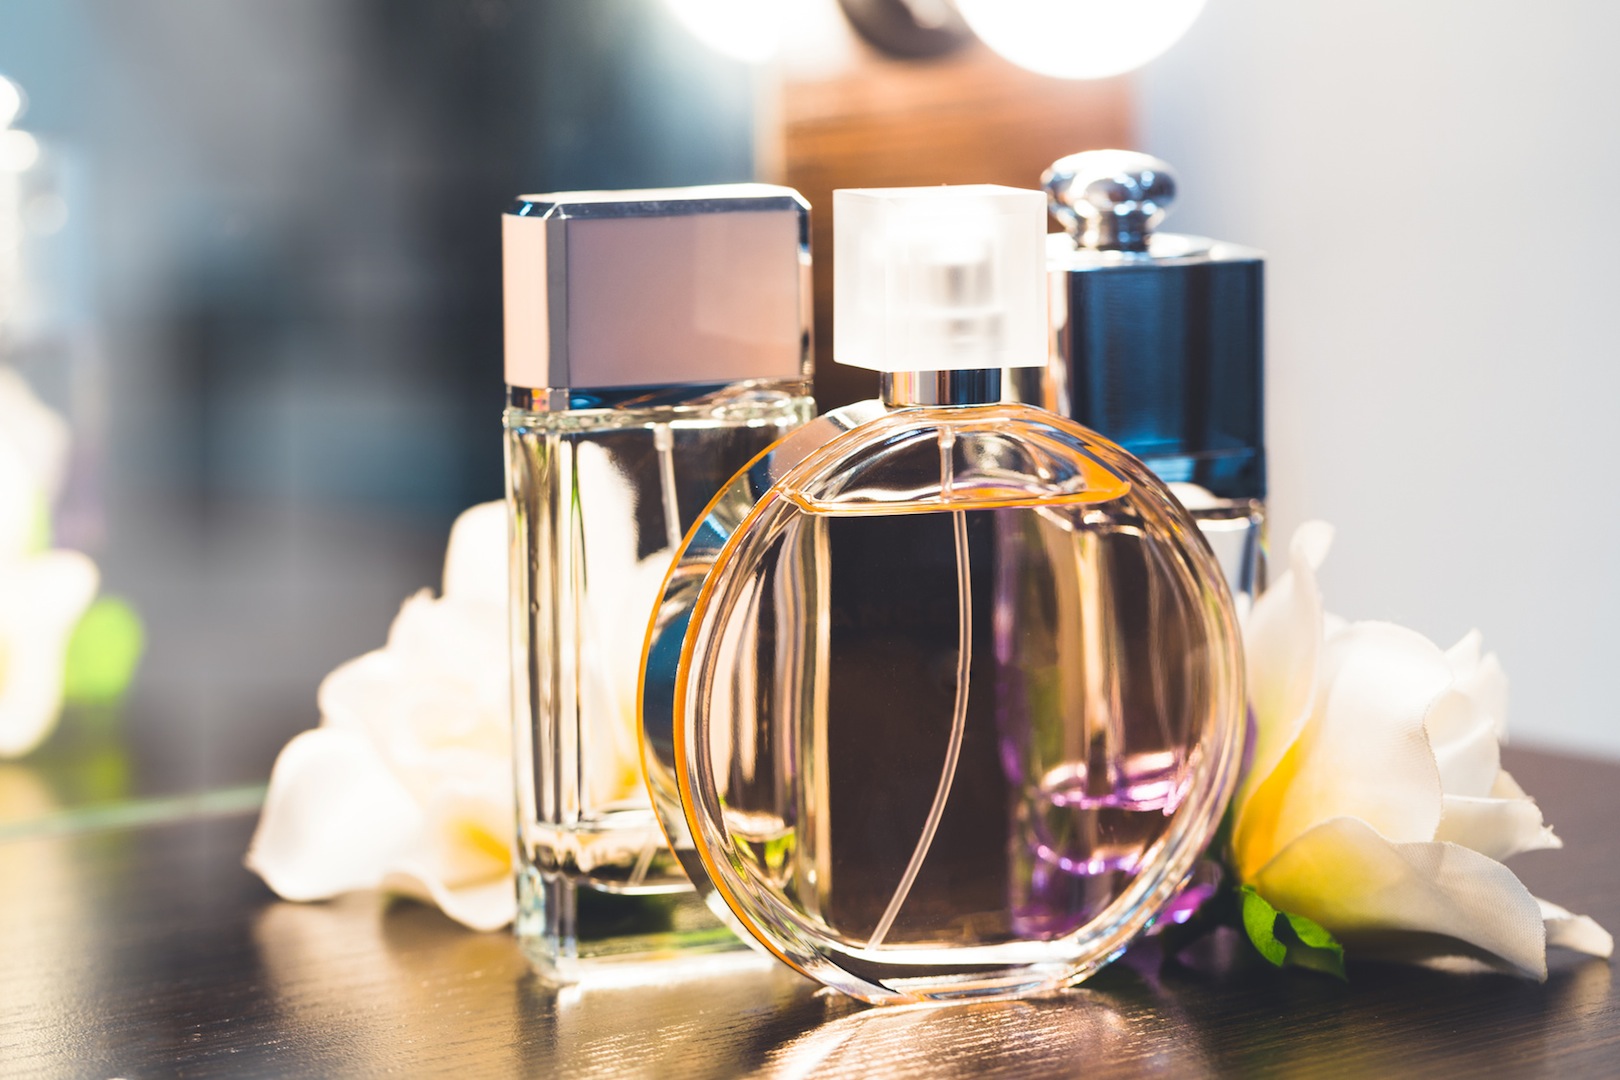 Top Tips on How to Choose the Perfect Cologne